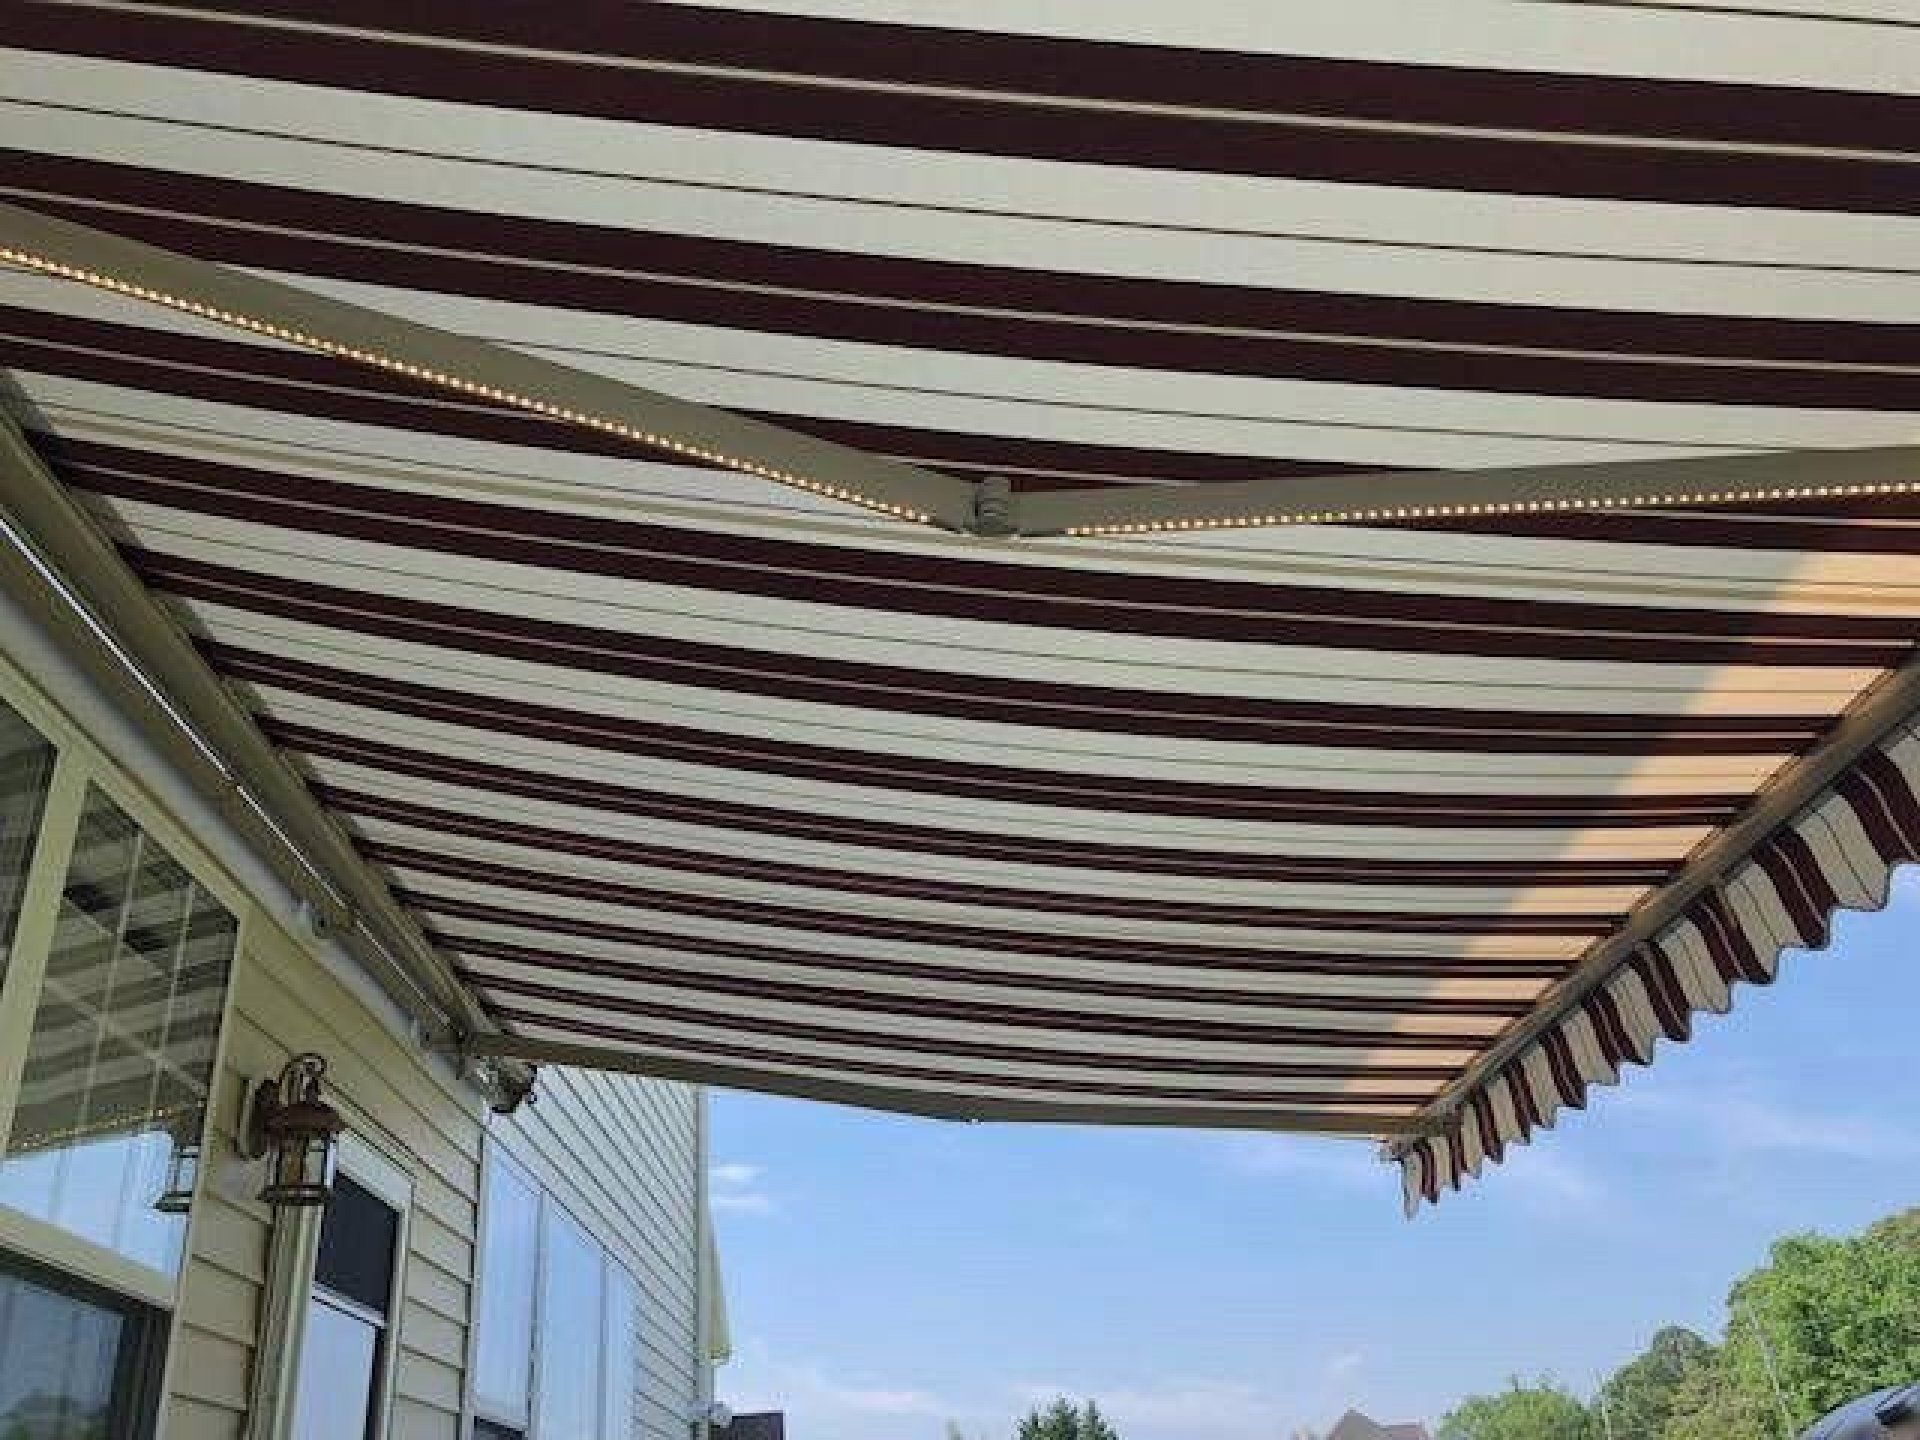 Retractable Screen & Awning Installation for Brentwood, TN